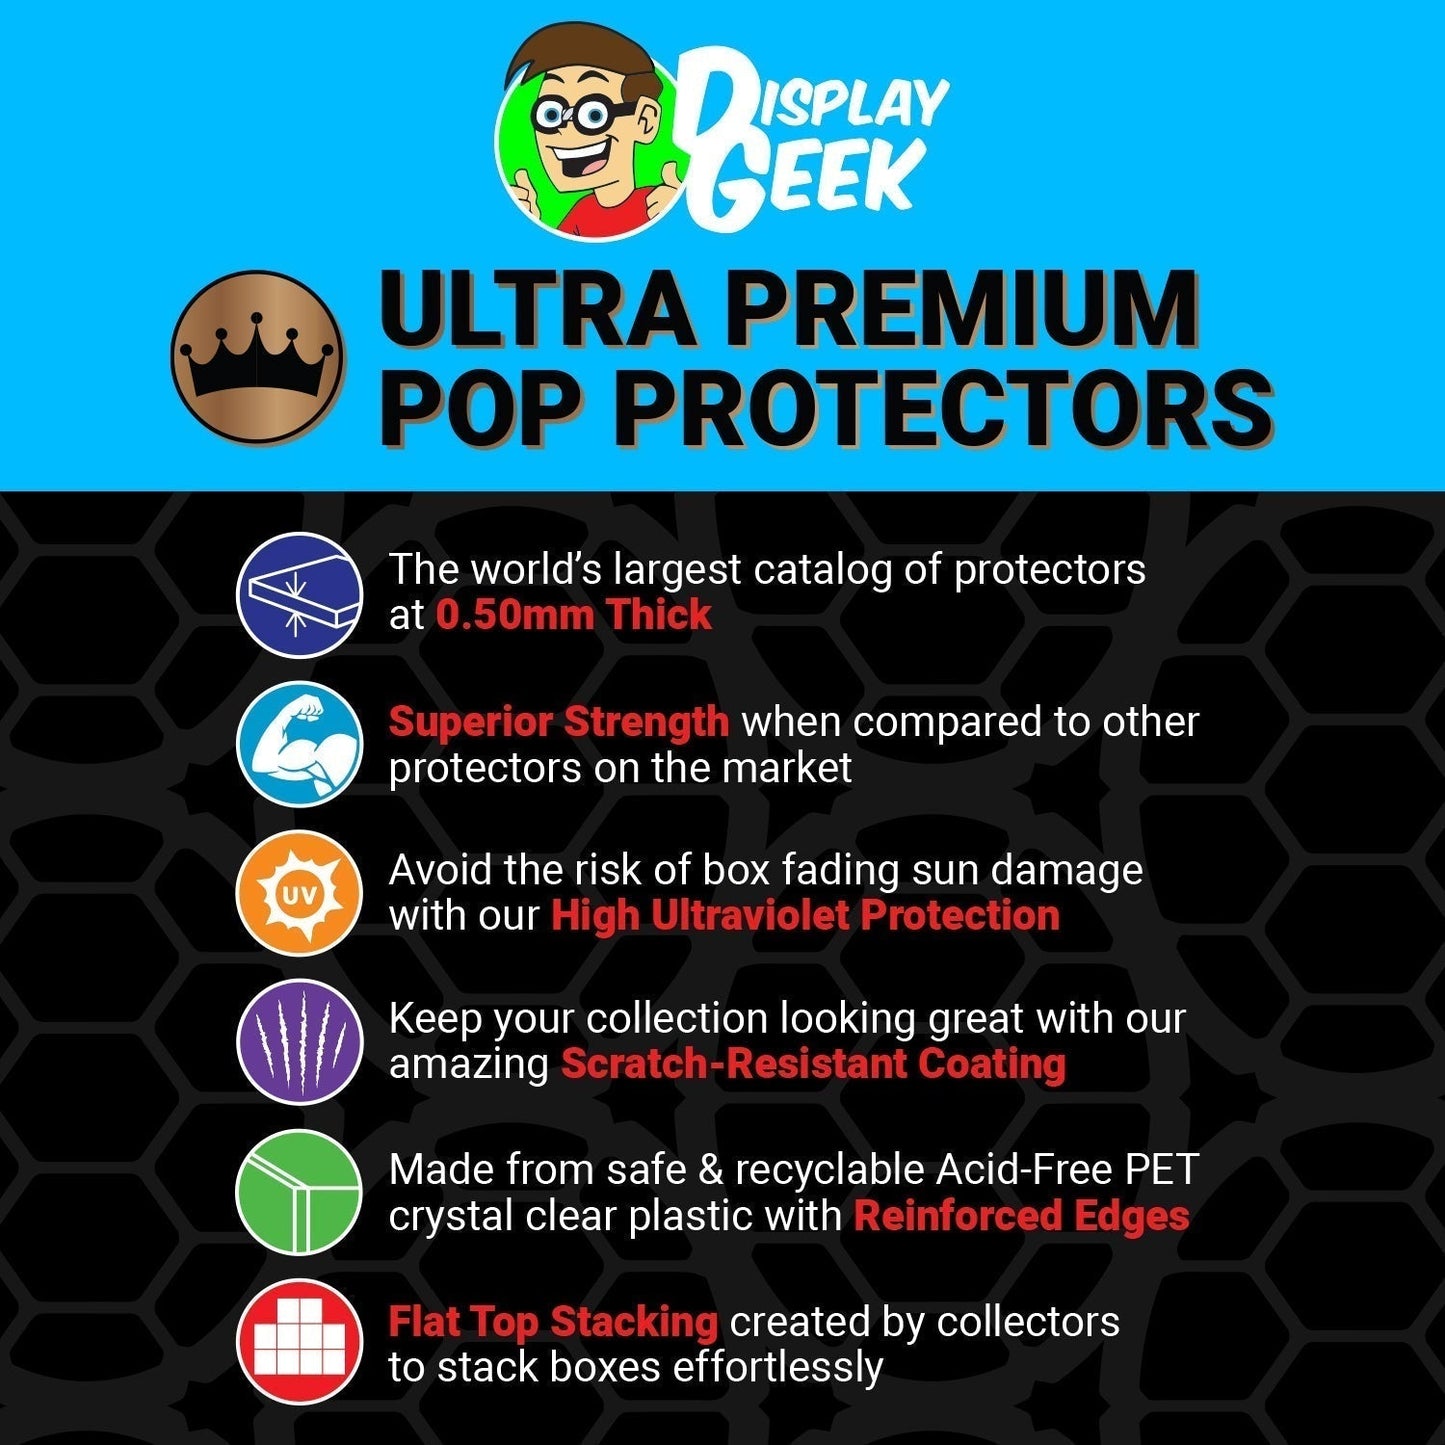 Pop Protector for 6 inch B.O.B. Gold Metallic #558 Super Funko Pop - PPG Pop Protector Guide Search Created by Display Geek